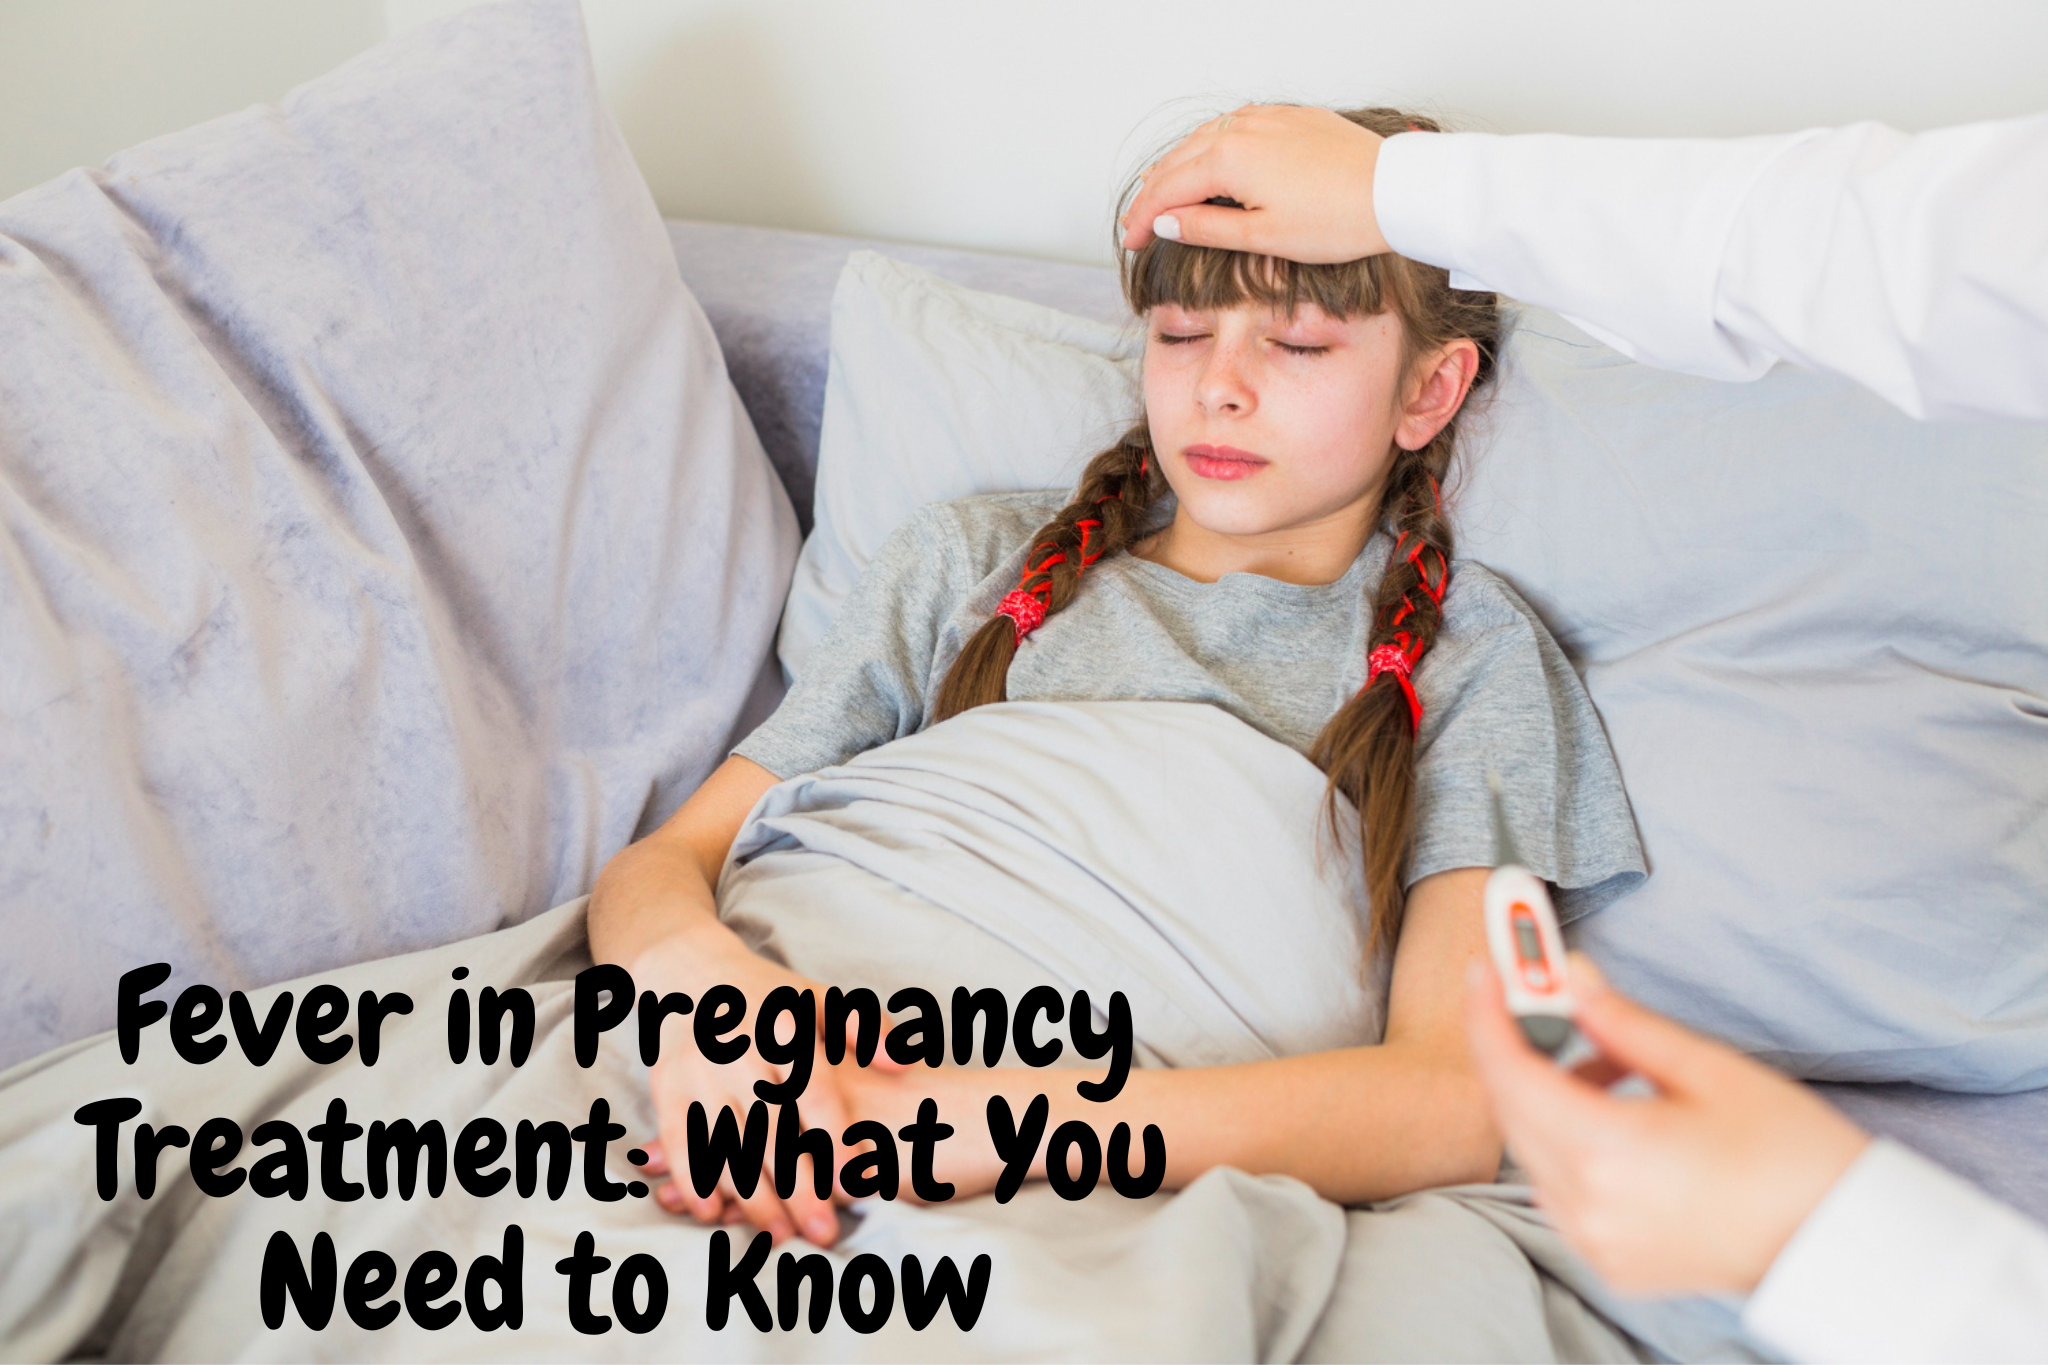 Fever in Pregnancy Treatment: What You Need to Know